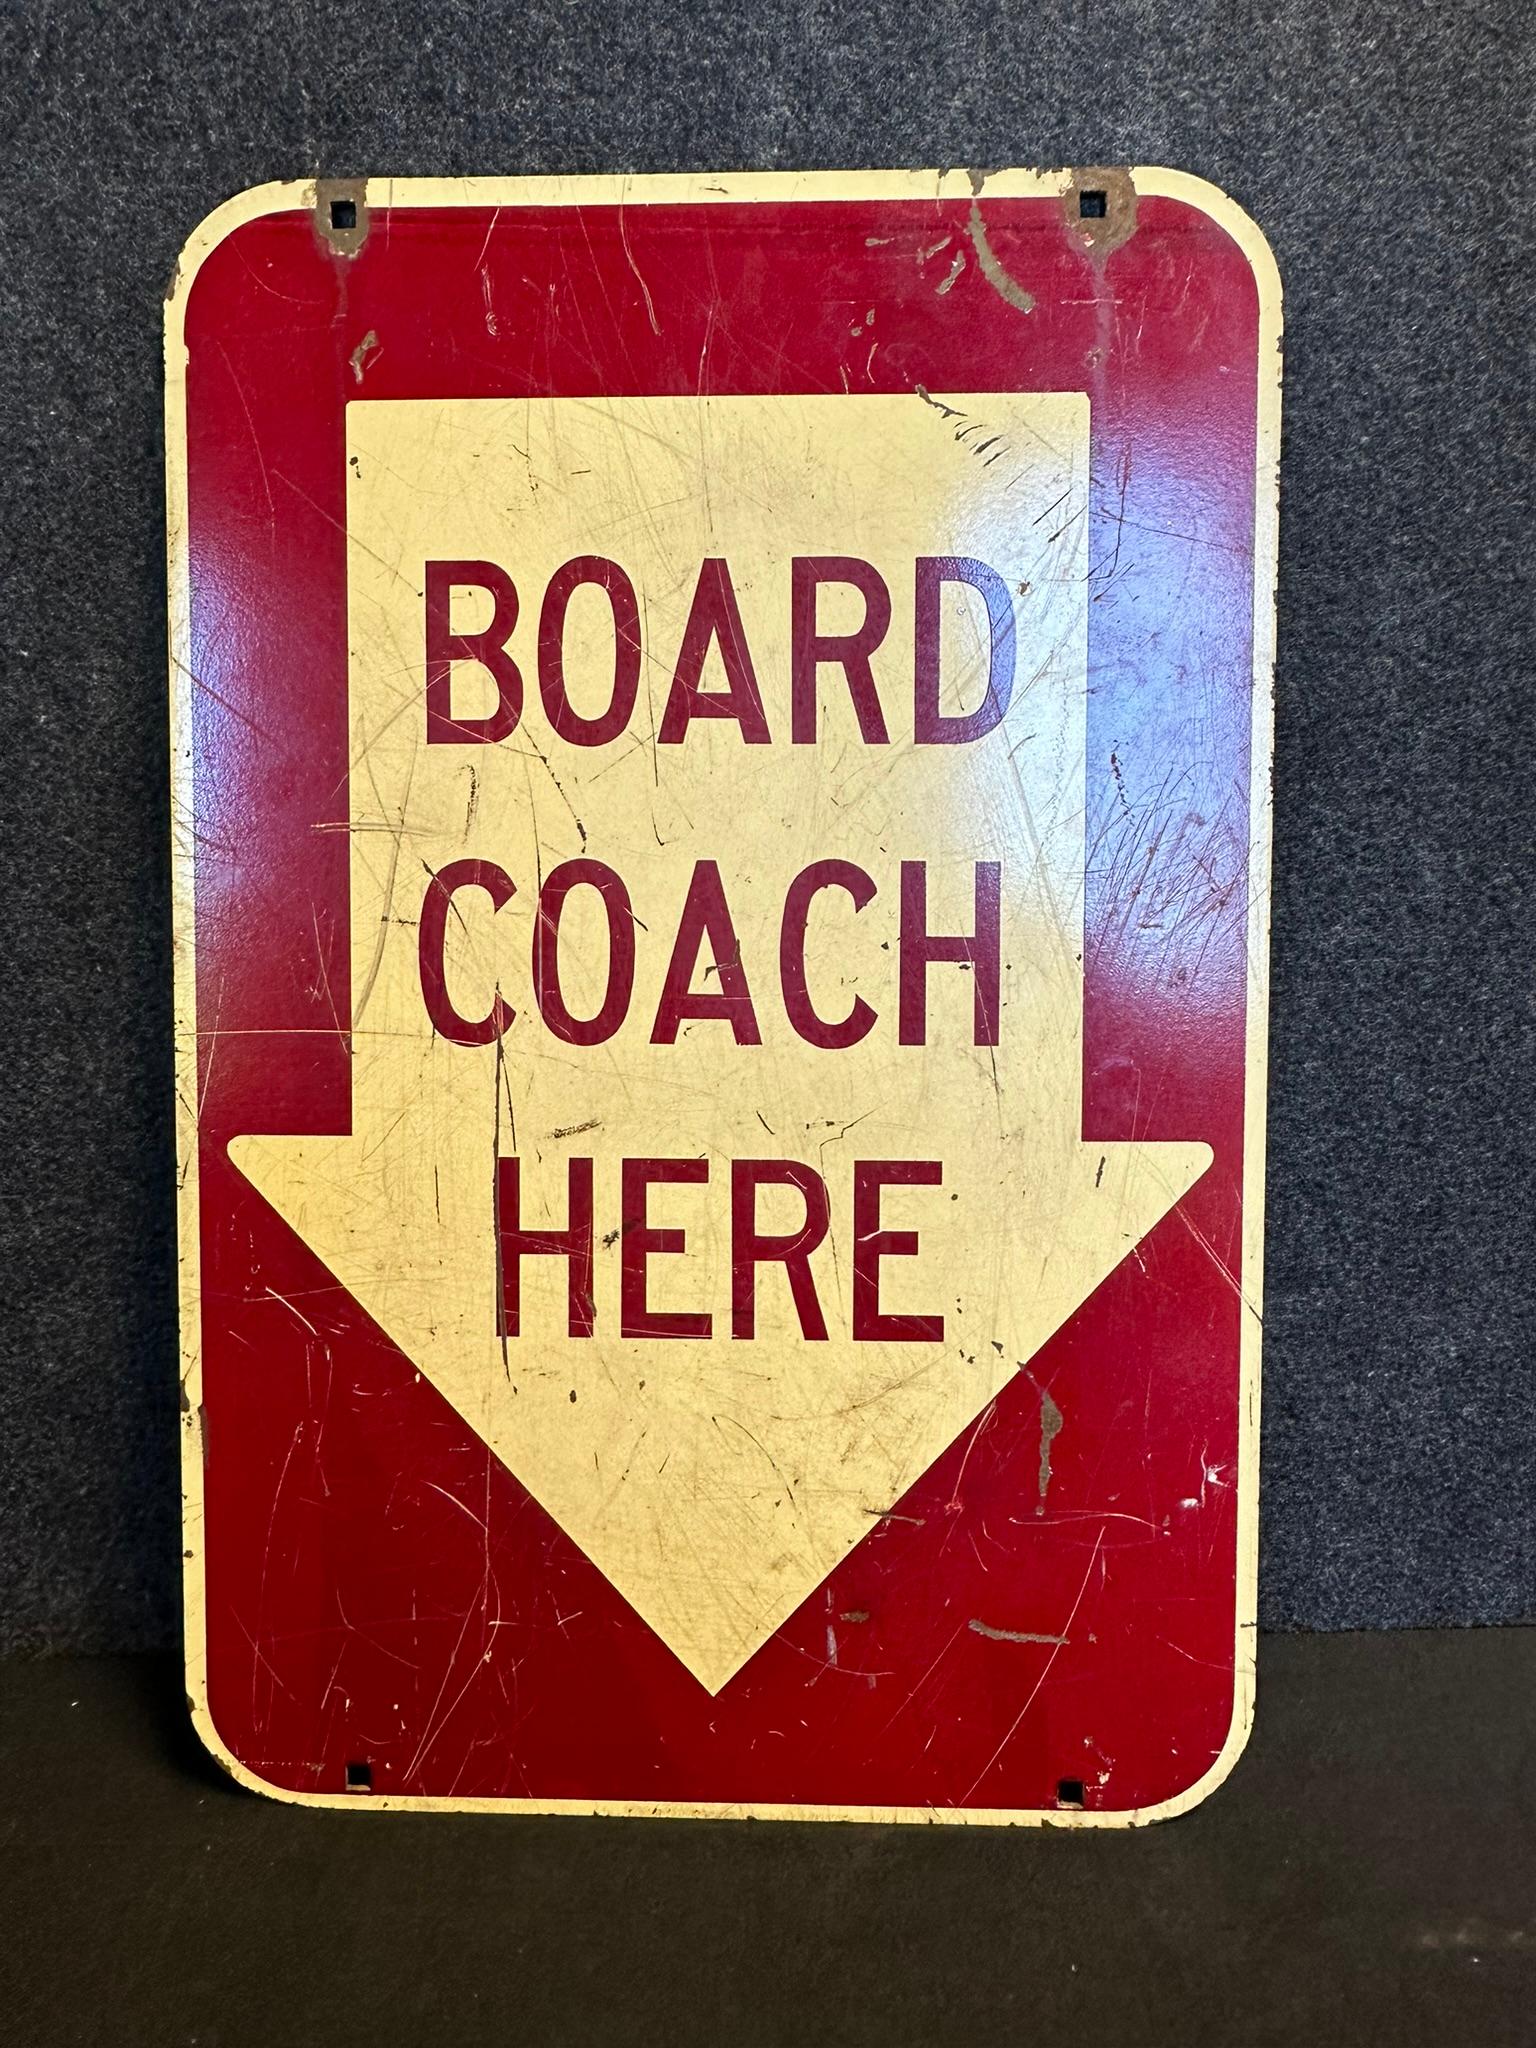 1930s Board Coach Here Double Sided Heavy Painted Metal Sign